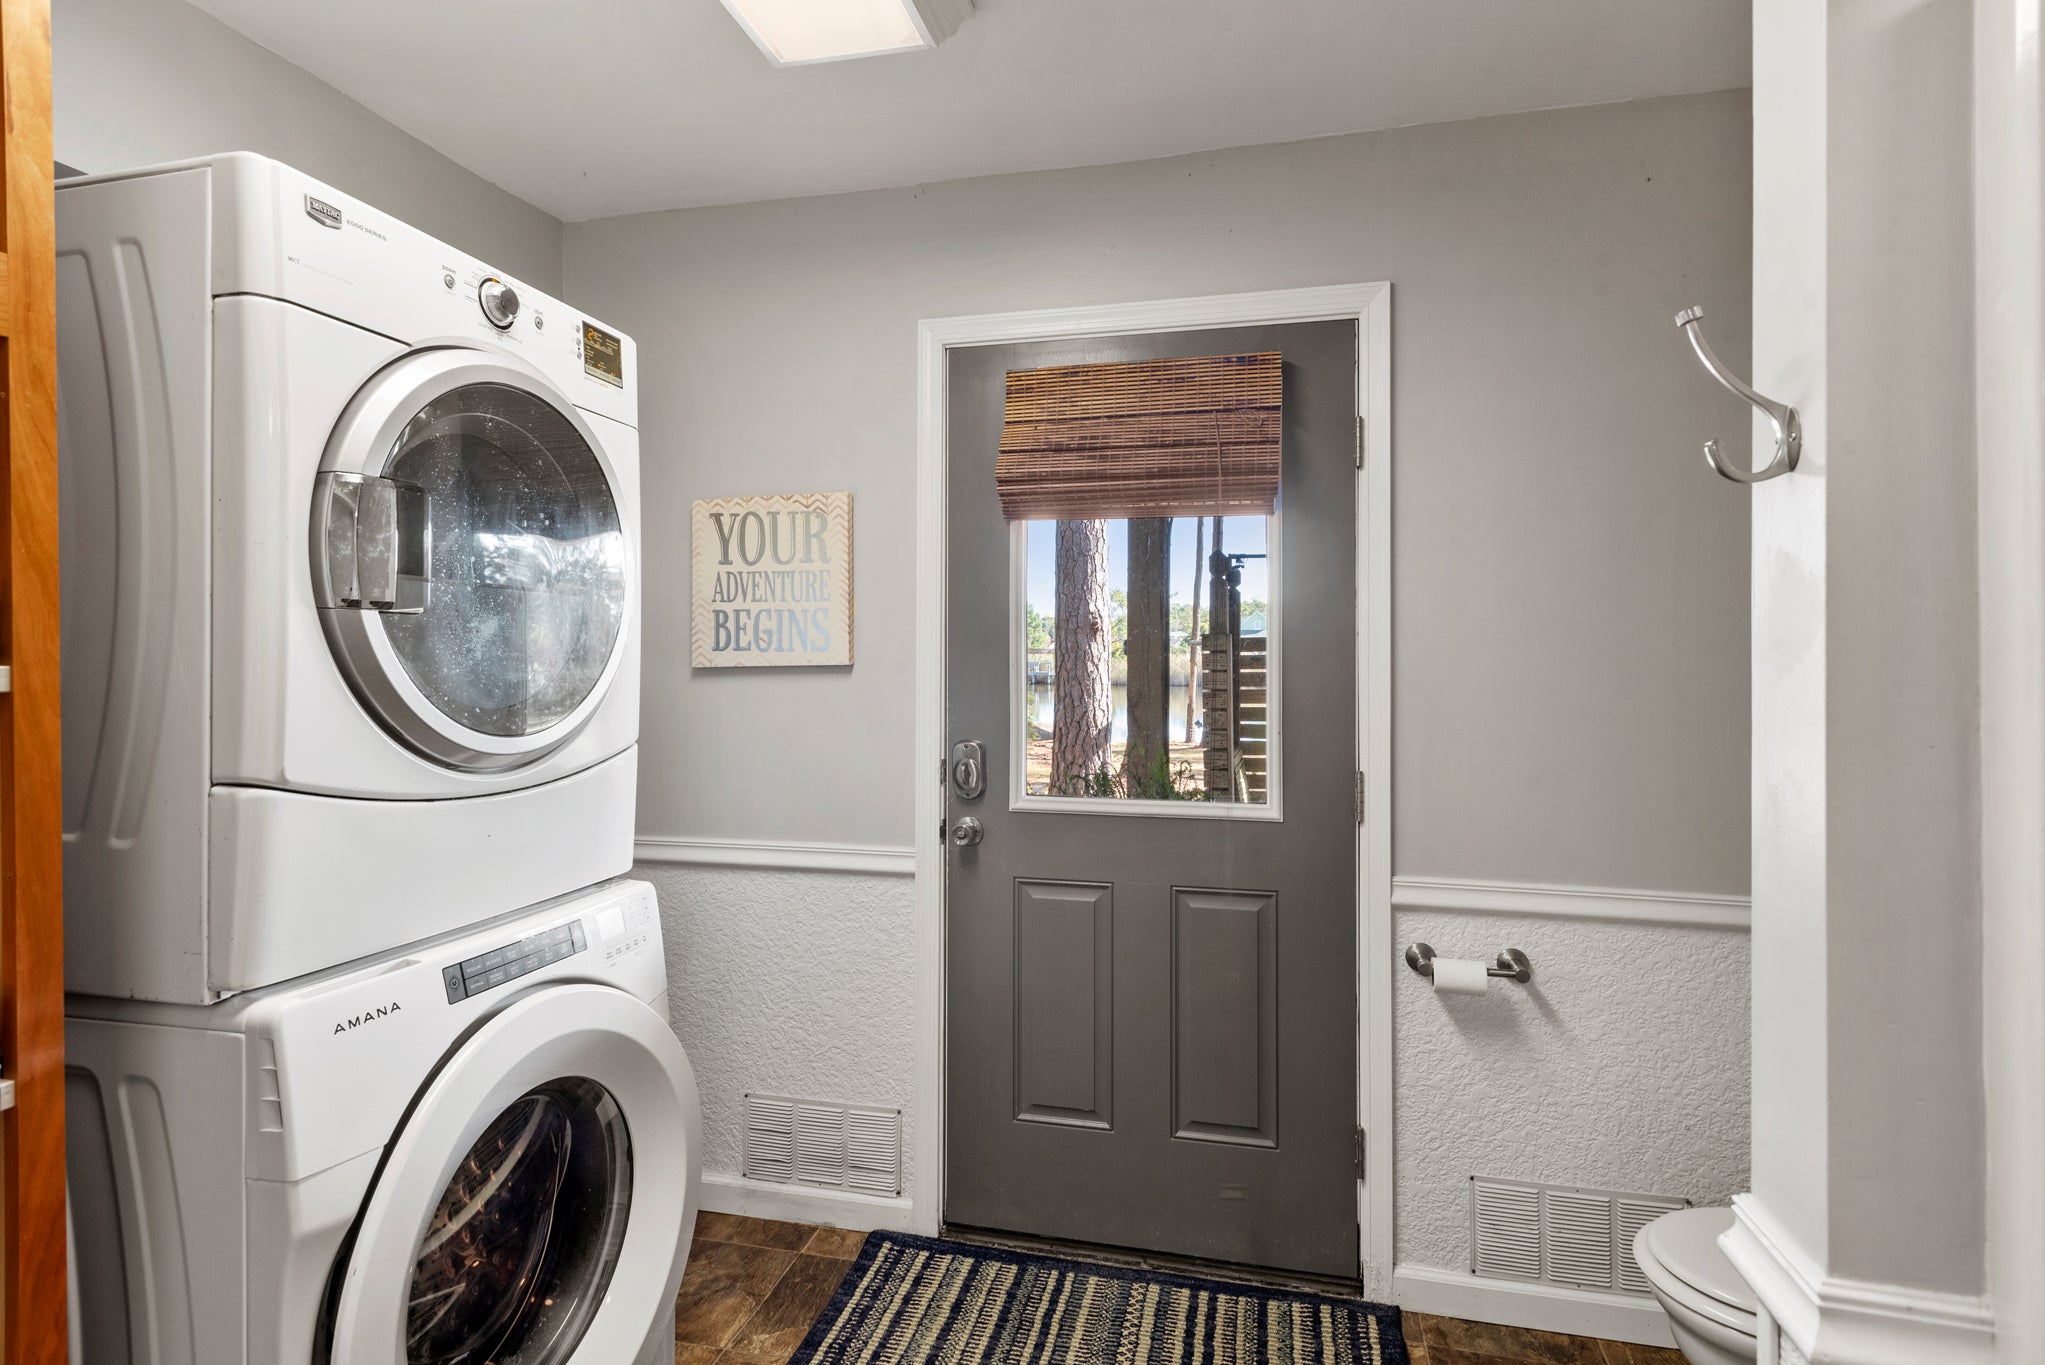 MNT1148: Sound Choice In Manteo | Bottom Level Apartment Laundry Area